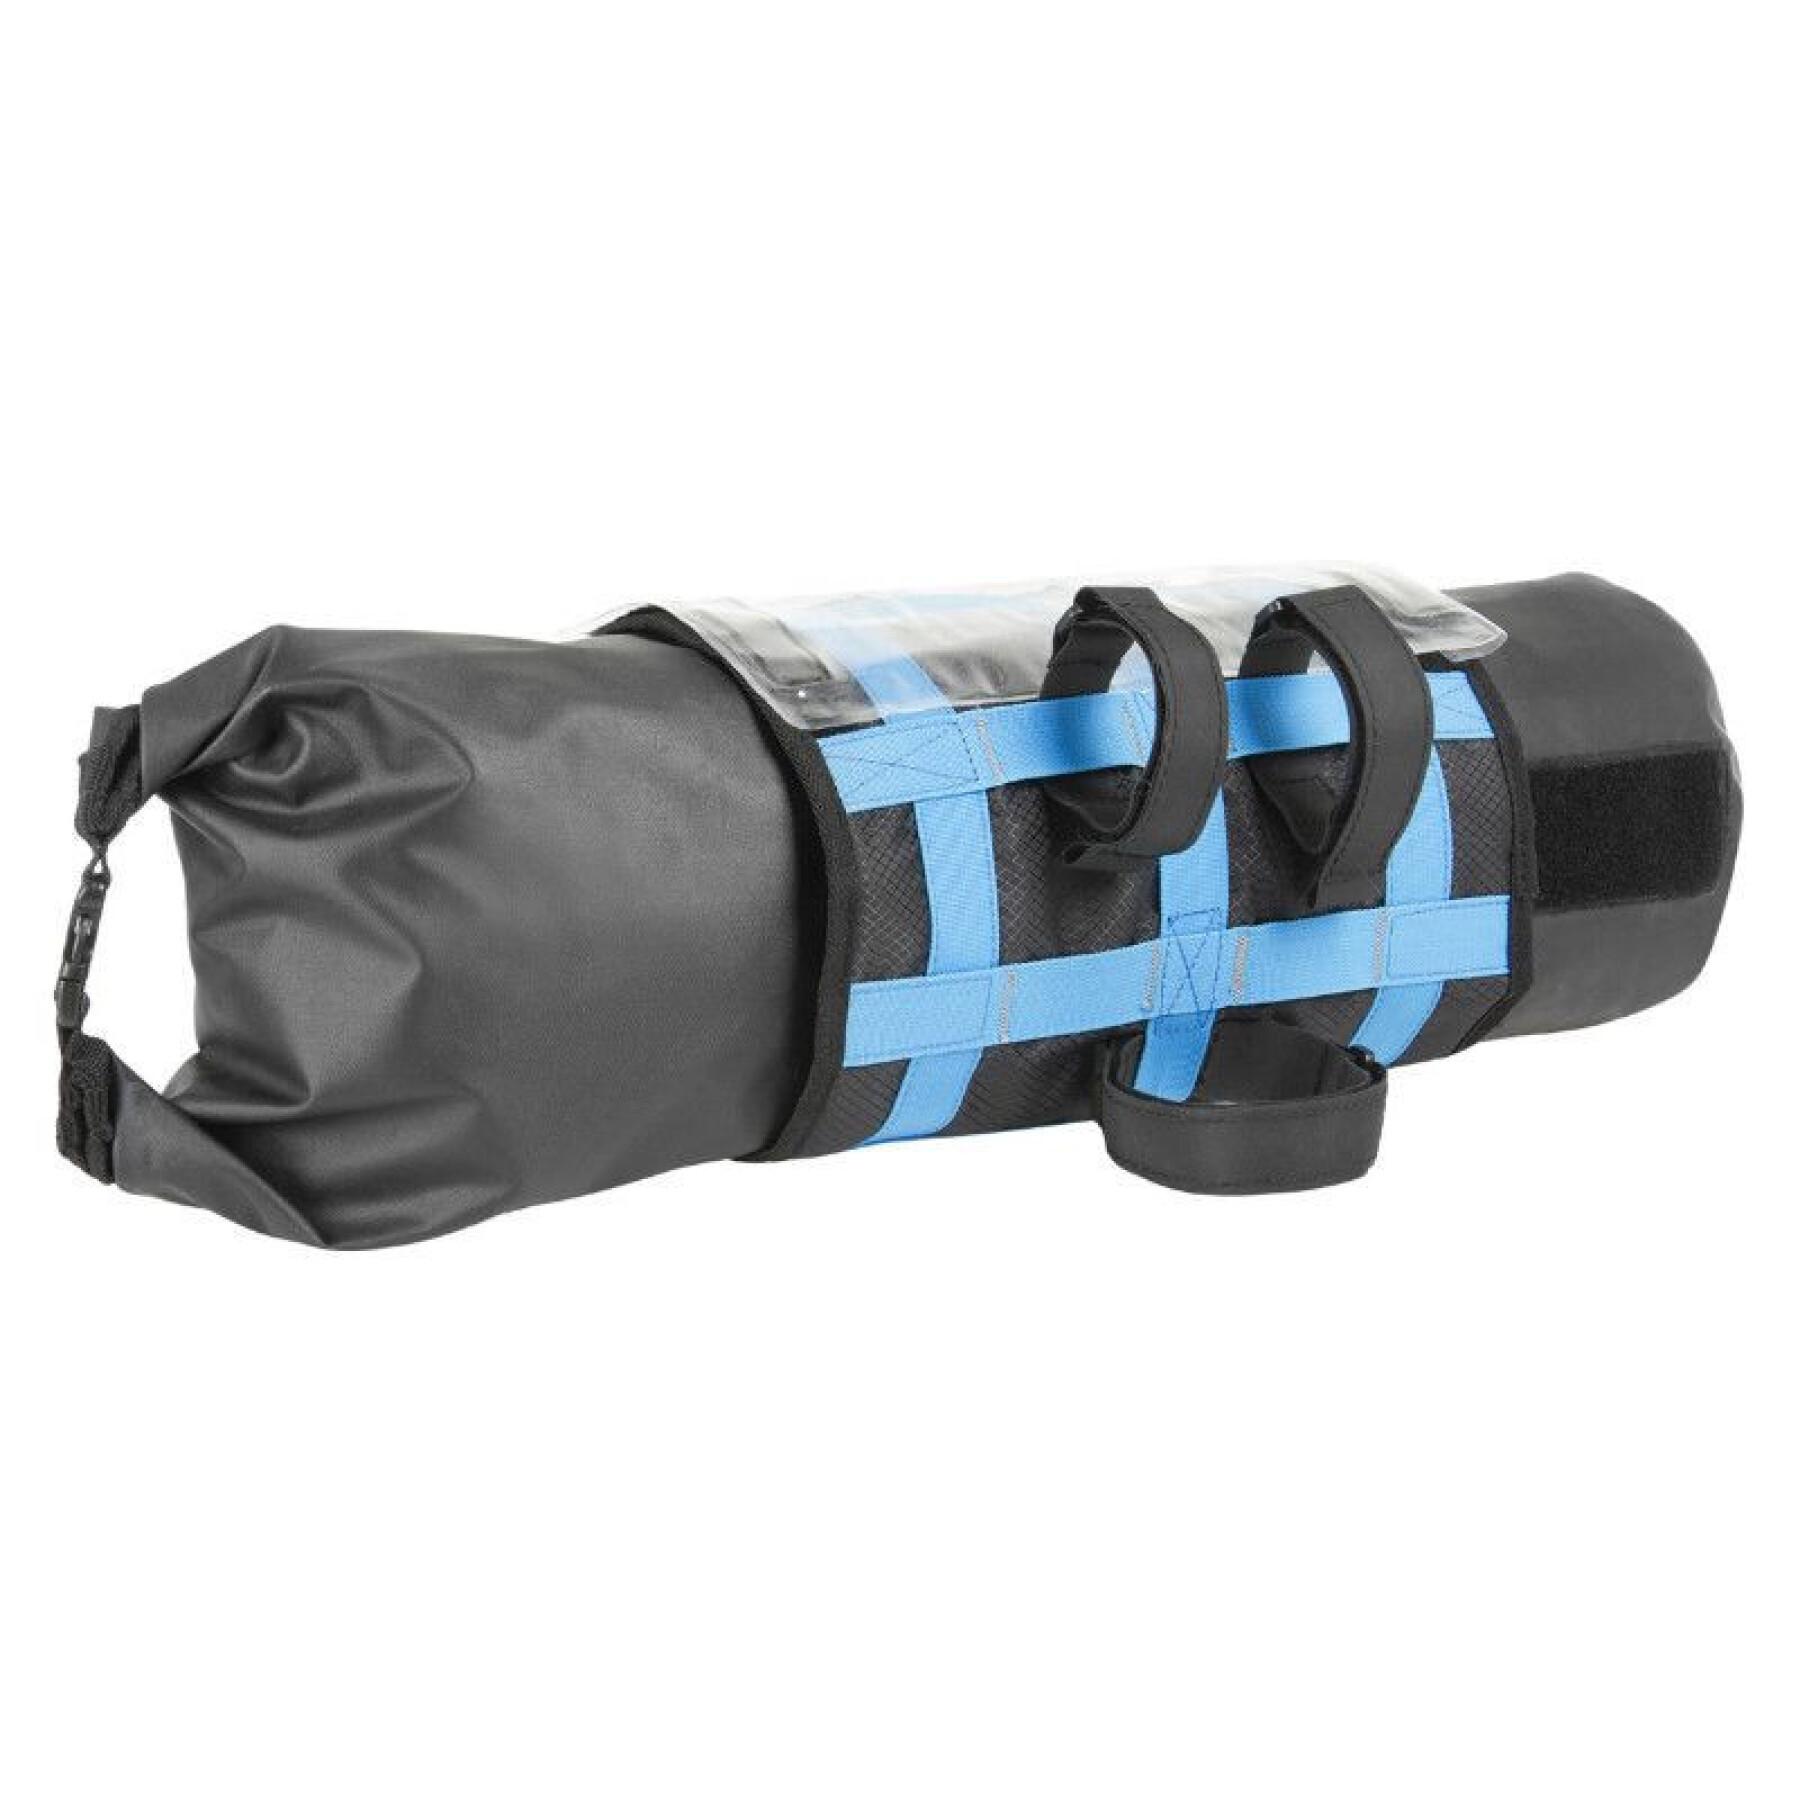 Waterproof bicycle handlebar bag with velcro fastening and card holder P2R 20 x 15 x 12 cm